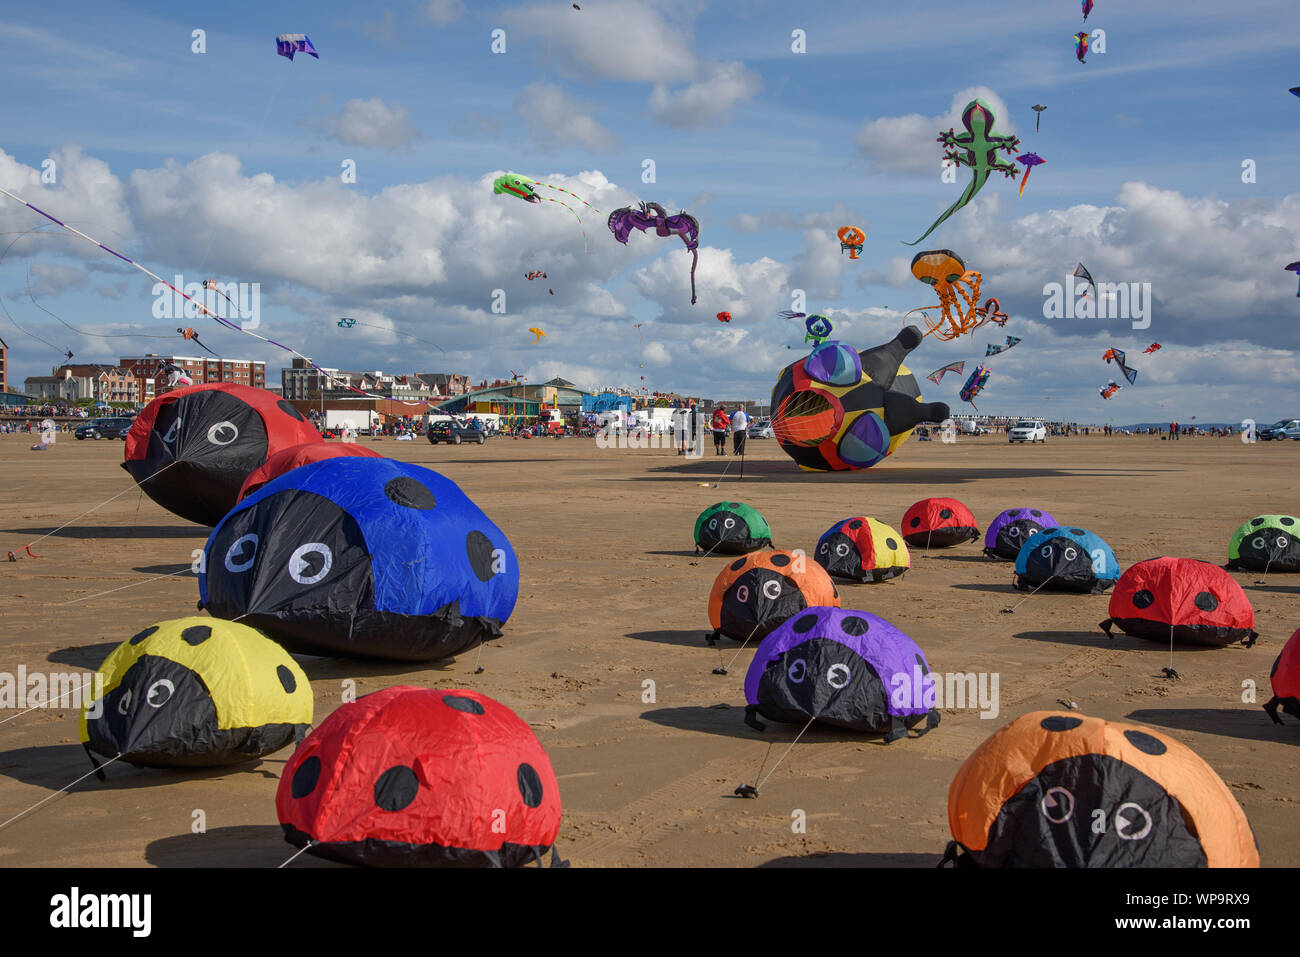 St Annes on the Sea, Lancashire, UK. 7th Sept 2019. St Annes International Kite Festival 2019, St Annes beach, St Annes on the Sea, Lancashire. Displays of kites from teams across the UK and overseas. Credit: John Eveson/Alamy Live News Stock Photo